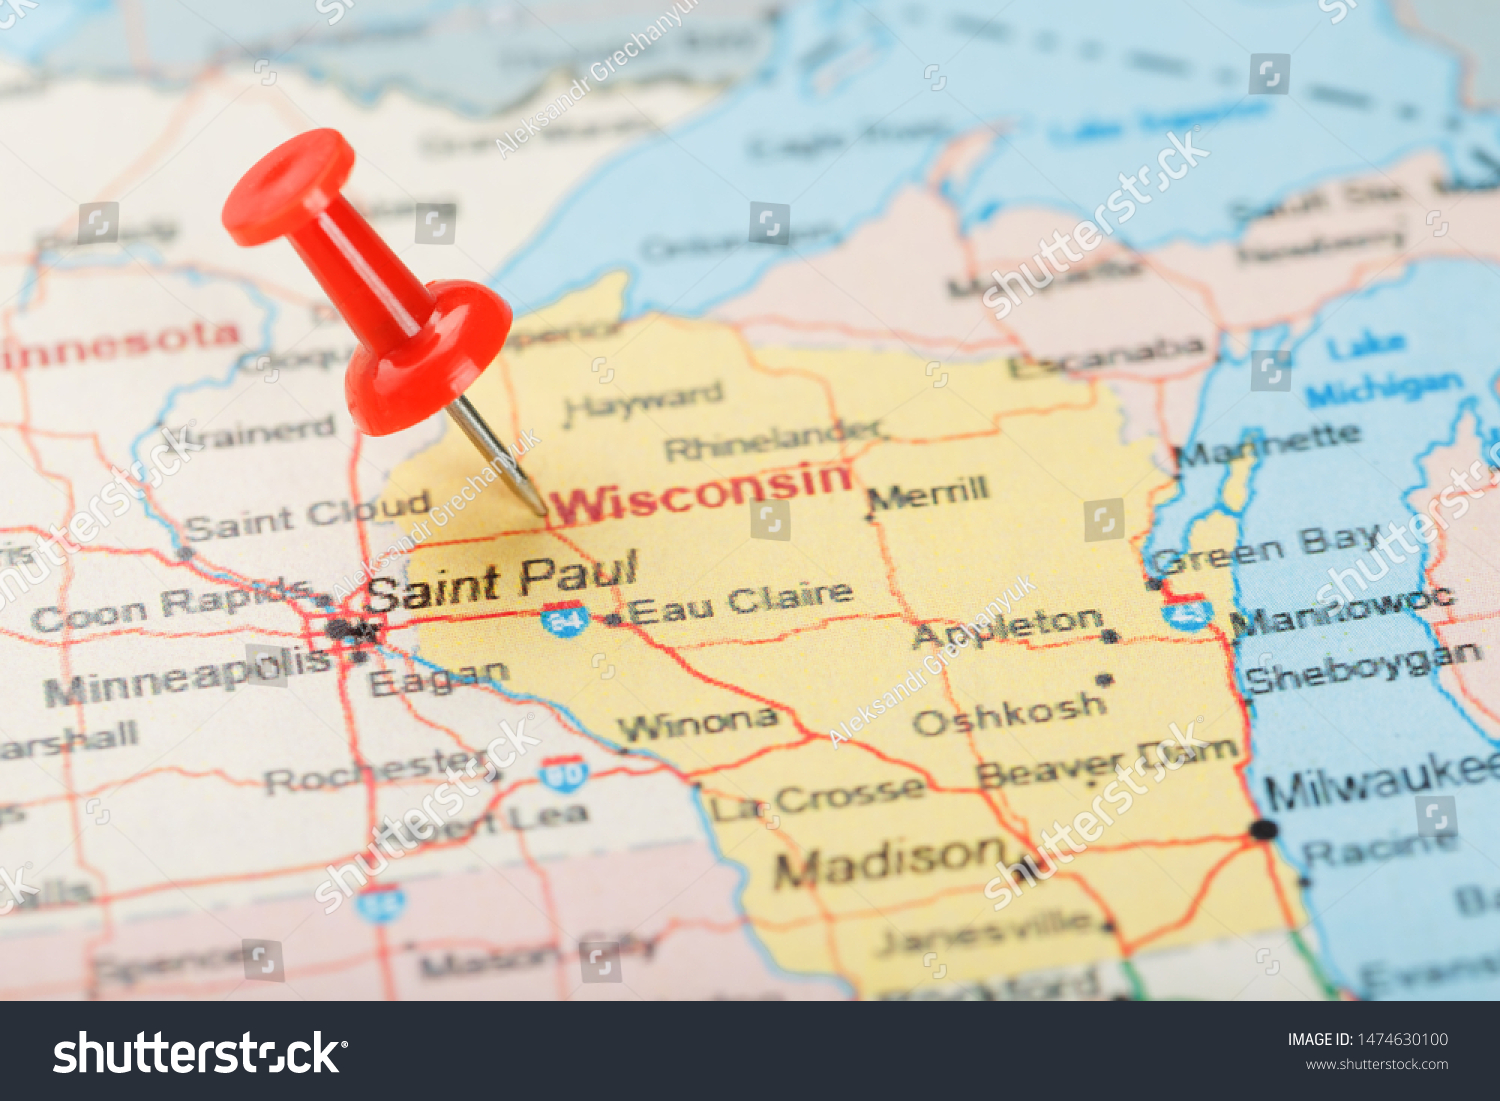 Red clerical needle on a map of USA, Wisconsin and the capital Madison. Close up map of Wisconsin with red tack #1474630100